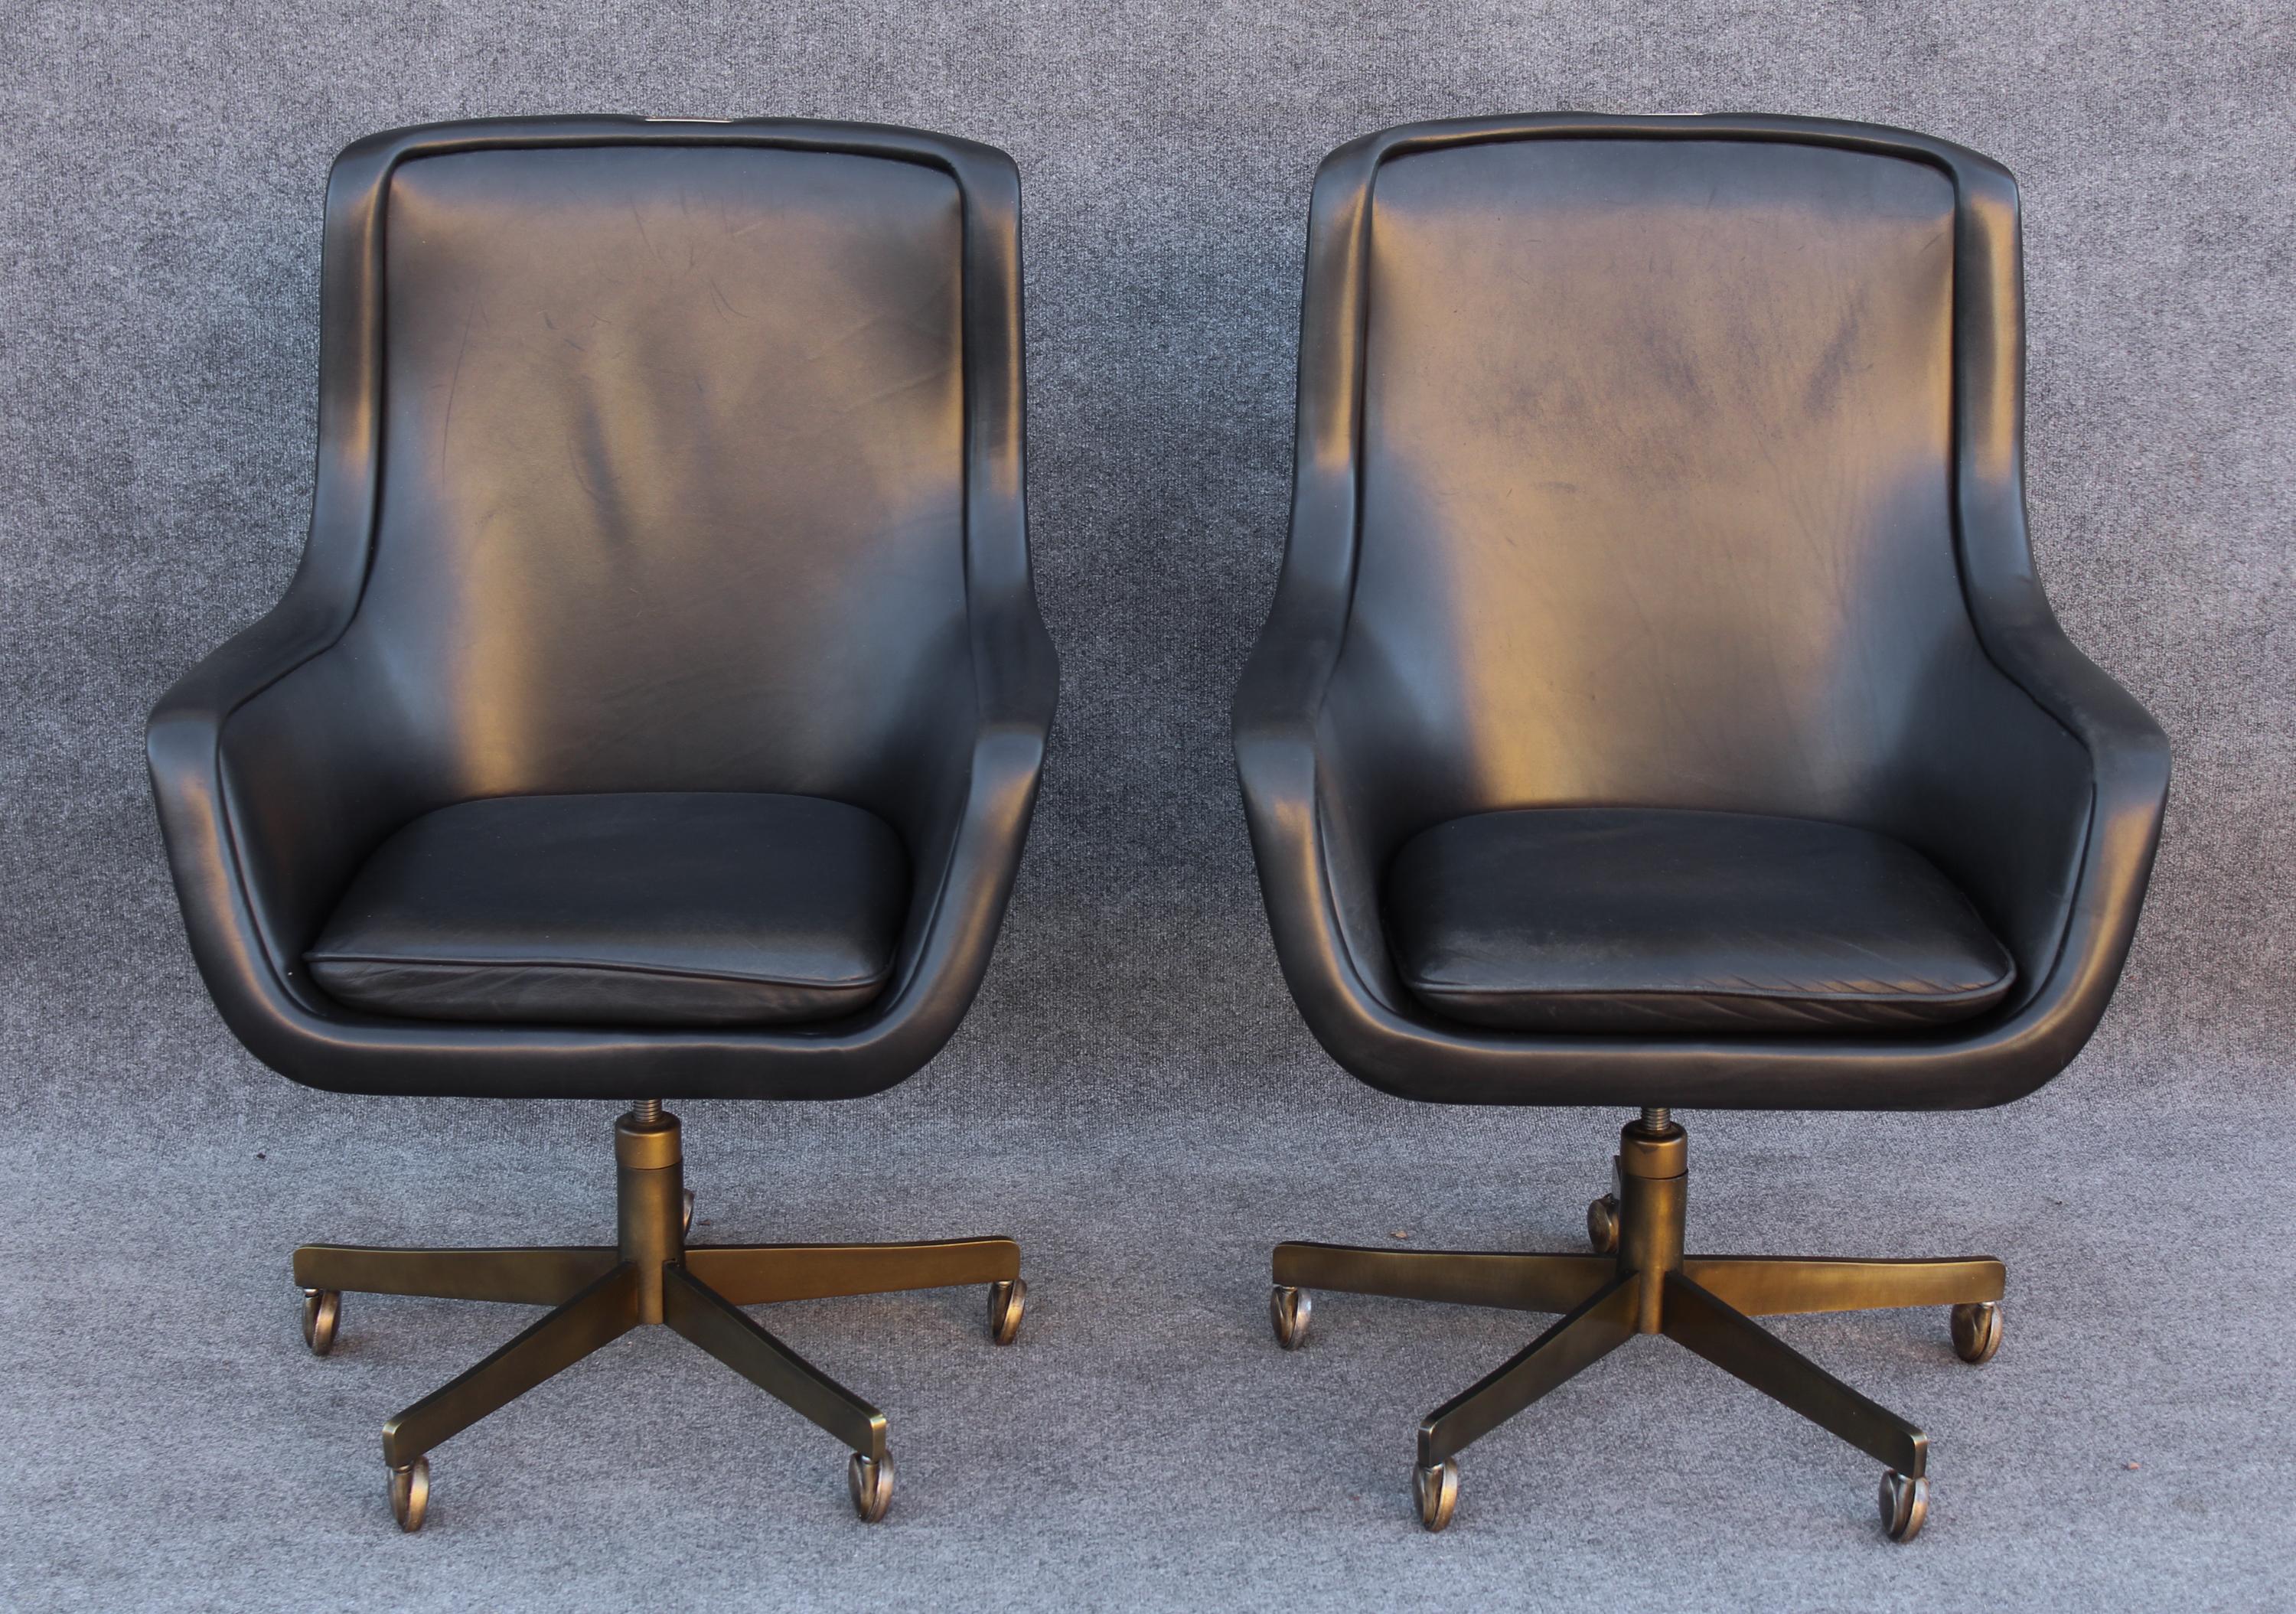 Designed by American design legend Ward Bennett, these chairs were produced in the mid 1980s by Brickel Associates, known for their American construction and exceptional quality. Not many of these chairs exist, and even fewer were made in this size.